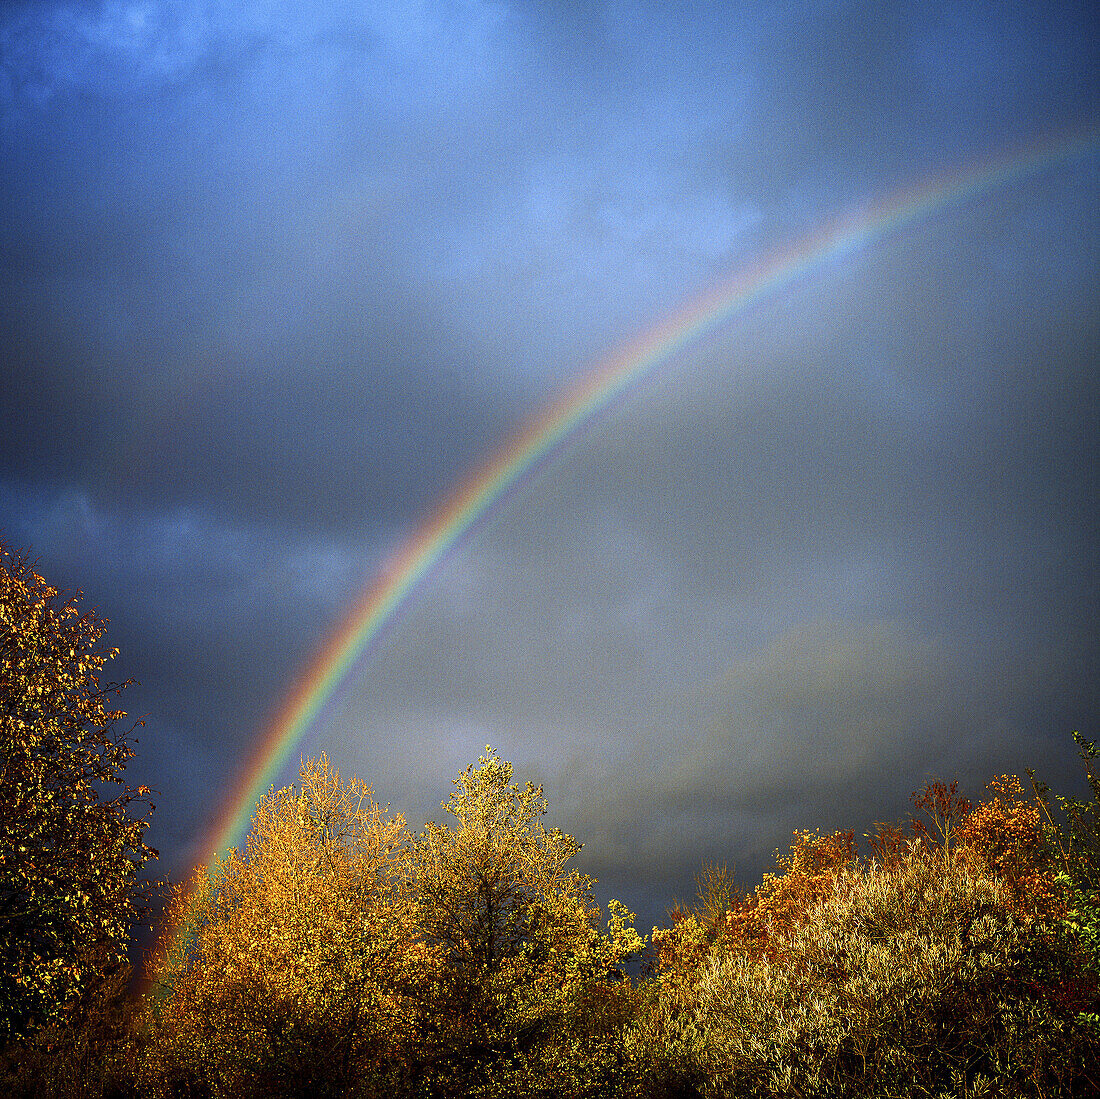 Rainbow with autumnal tree foliage and stormy sky